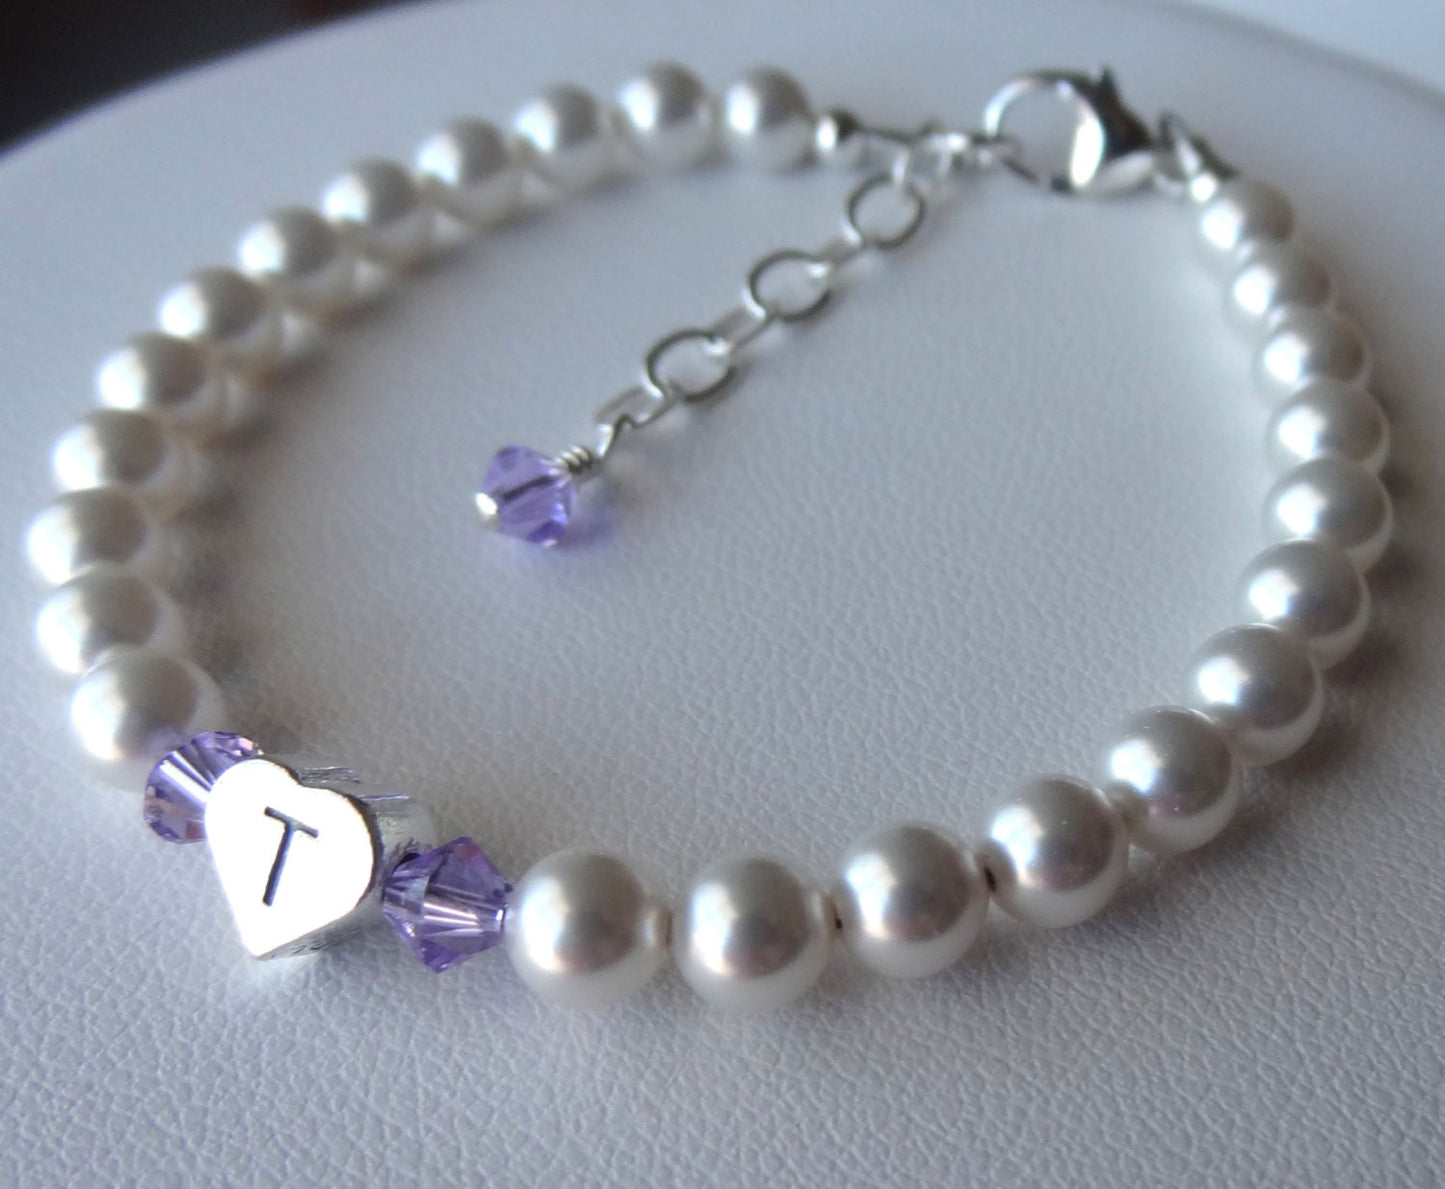 Personalized Silver and Gold Initial Baptism Bracelet,Flower Girl Pearl Bracelet,Christening, First Communion, Confirmation, Baby Bracelet